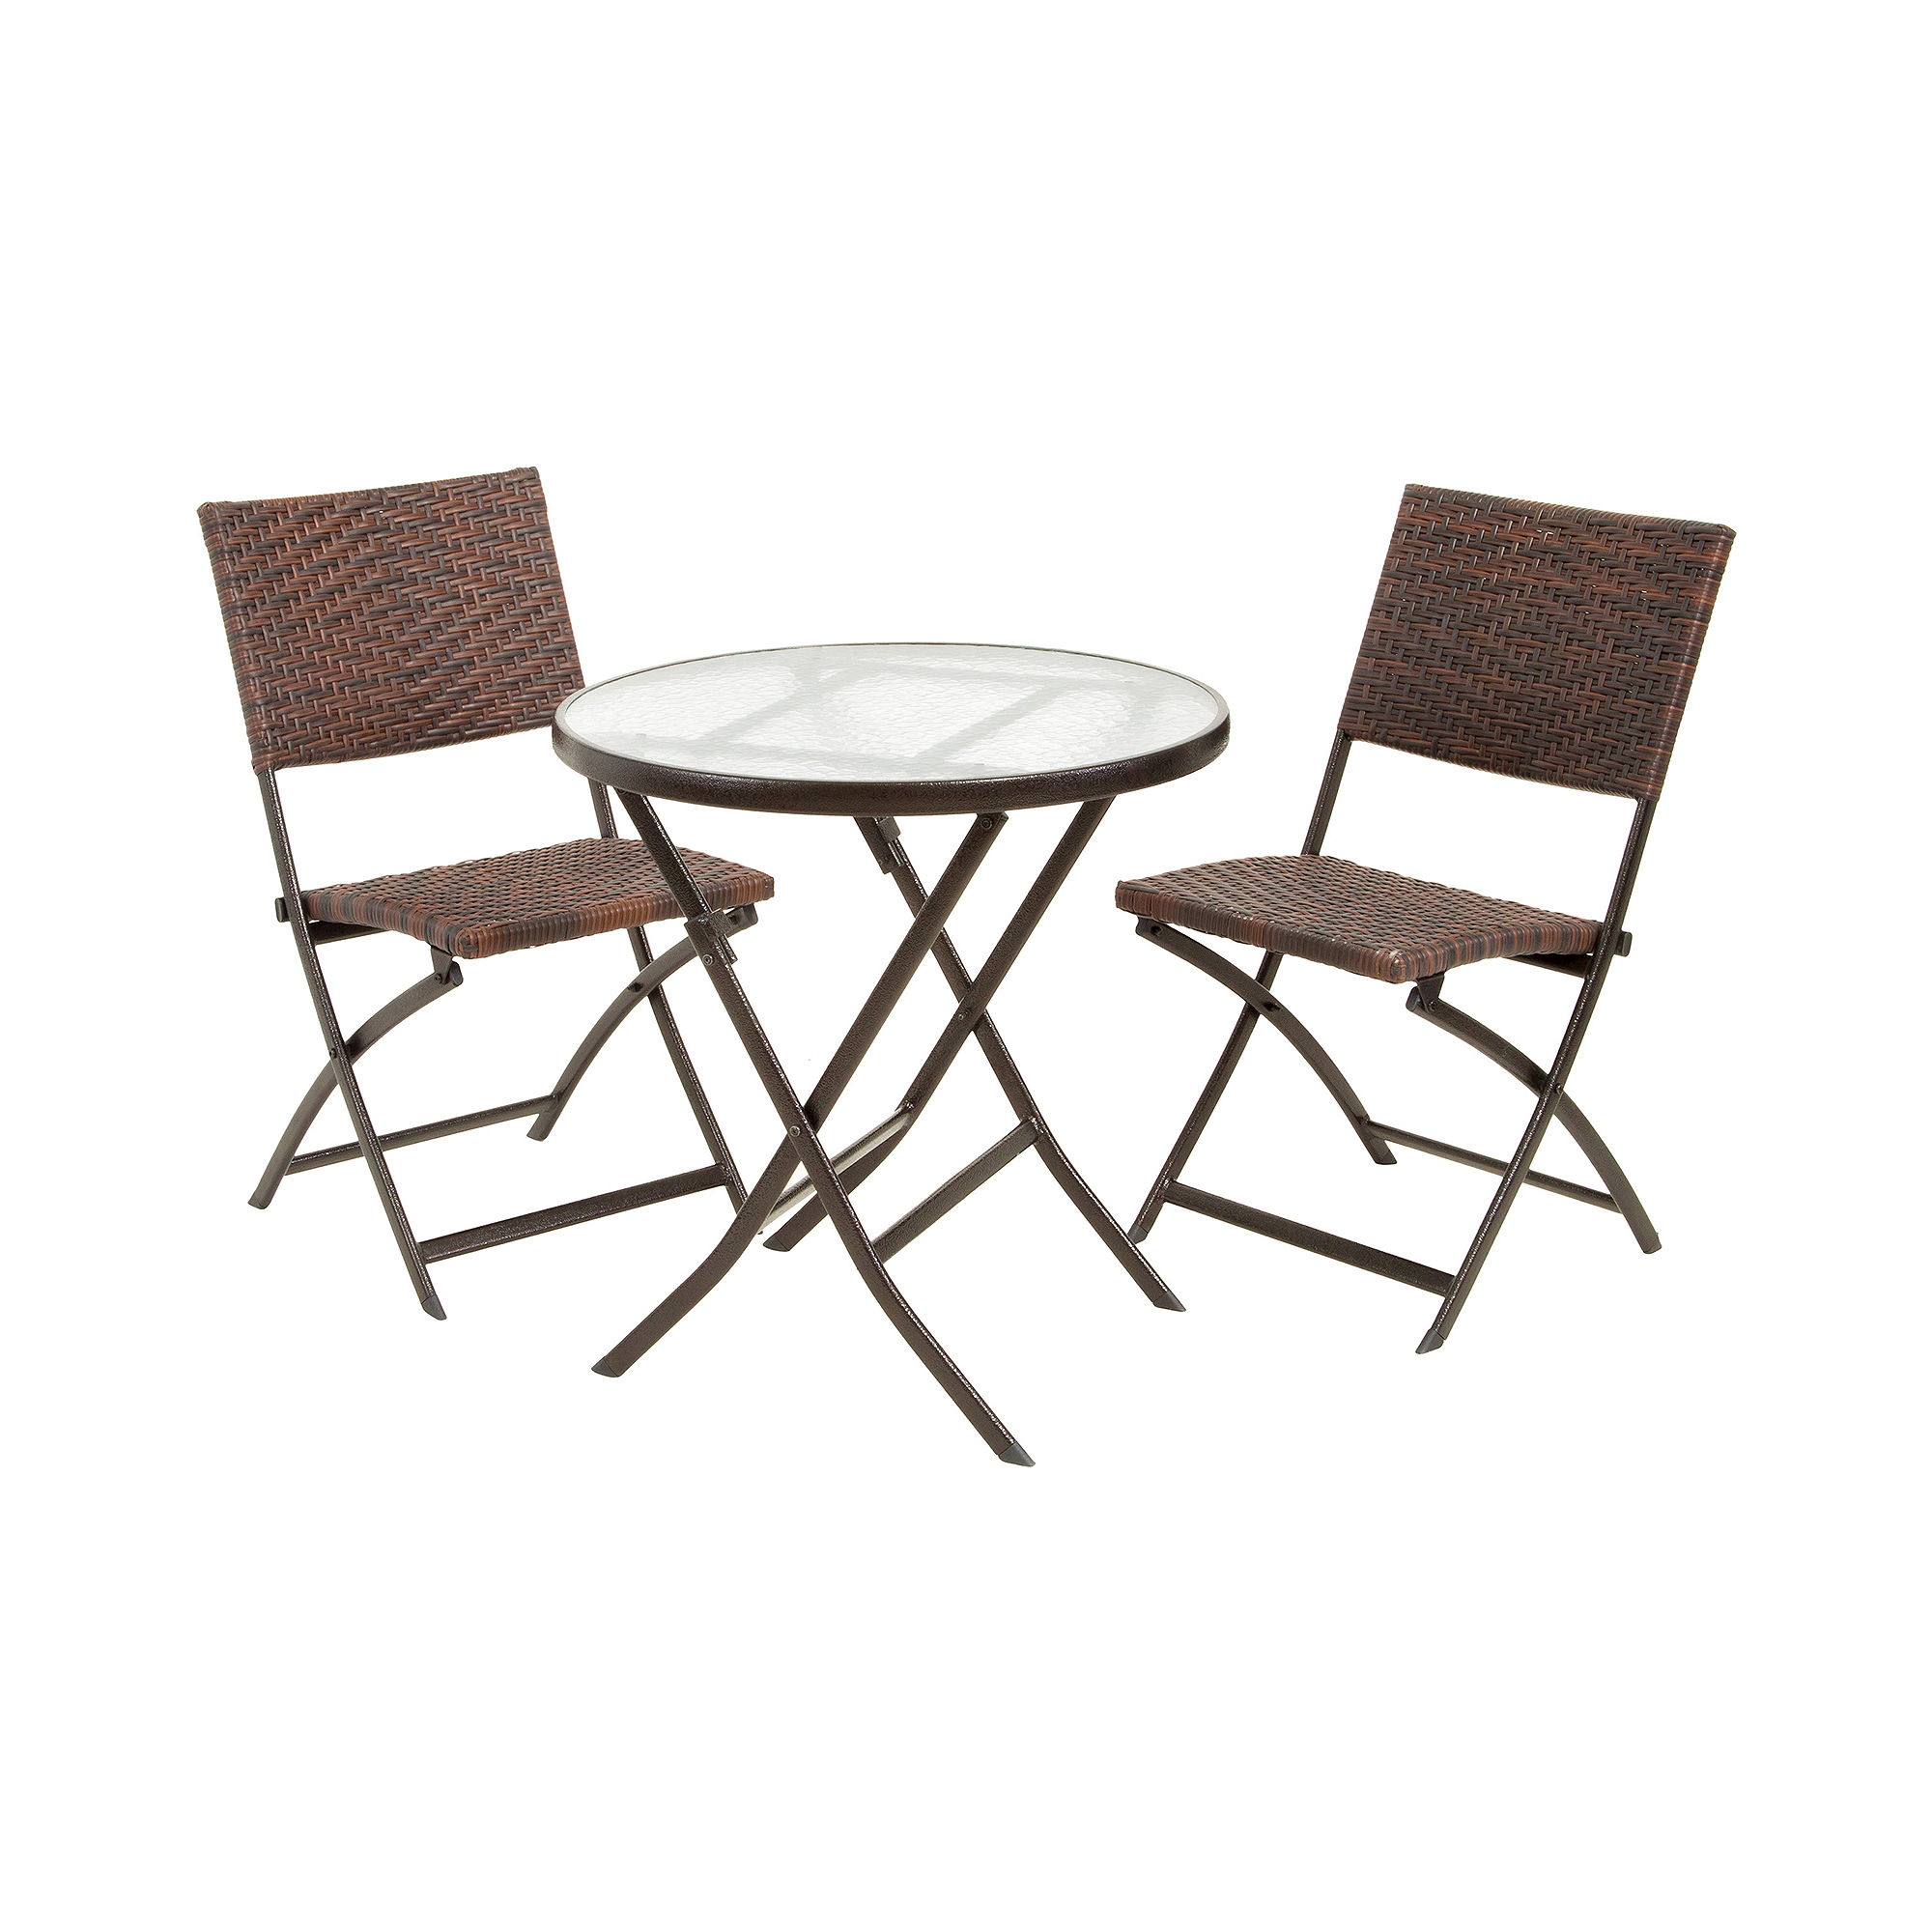 Caracas 3-pc. Wicker Outdoor Folding Table and Chair Set